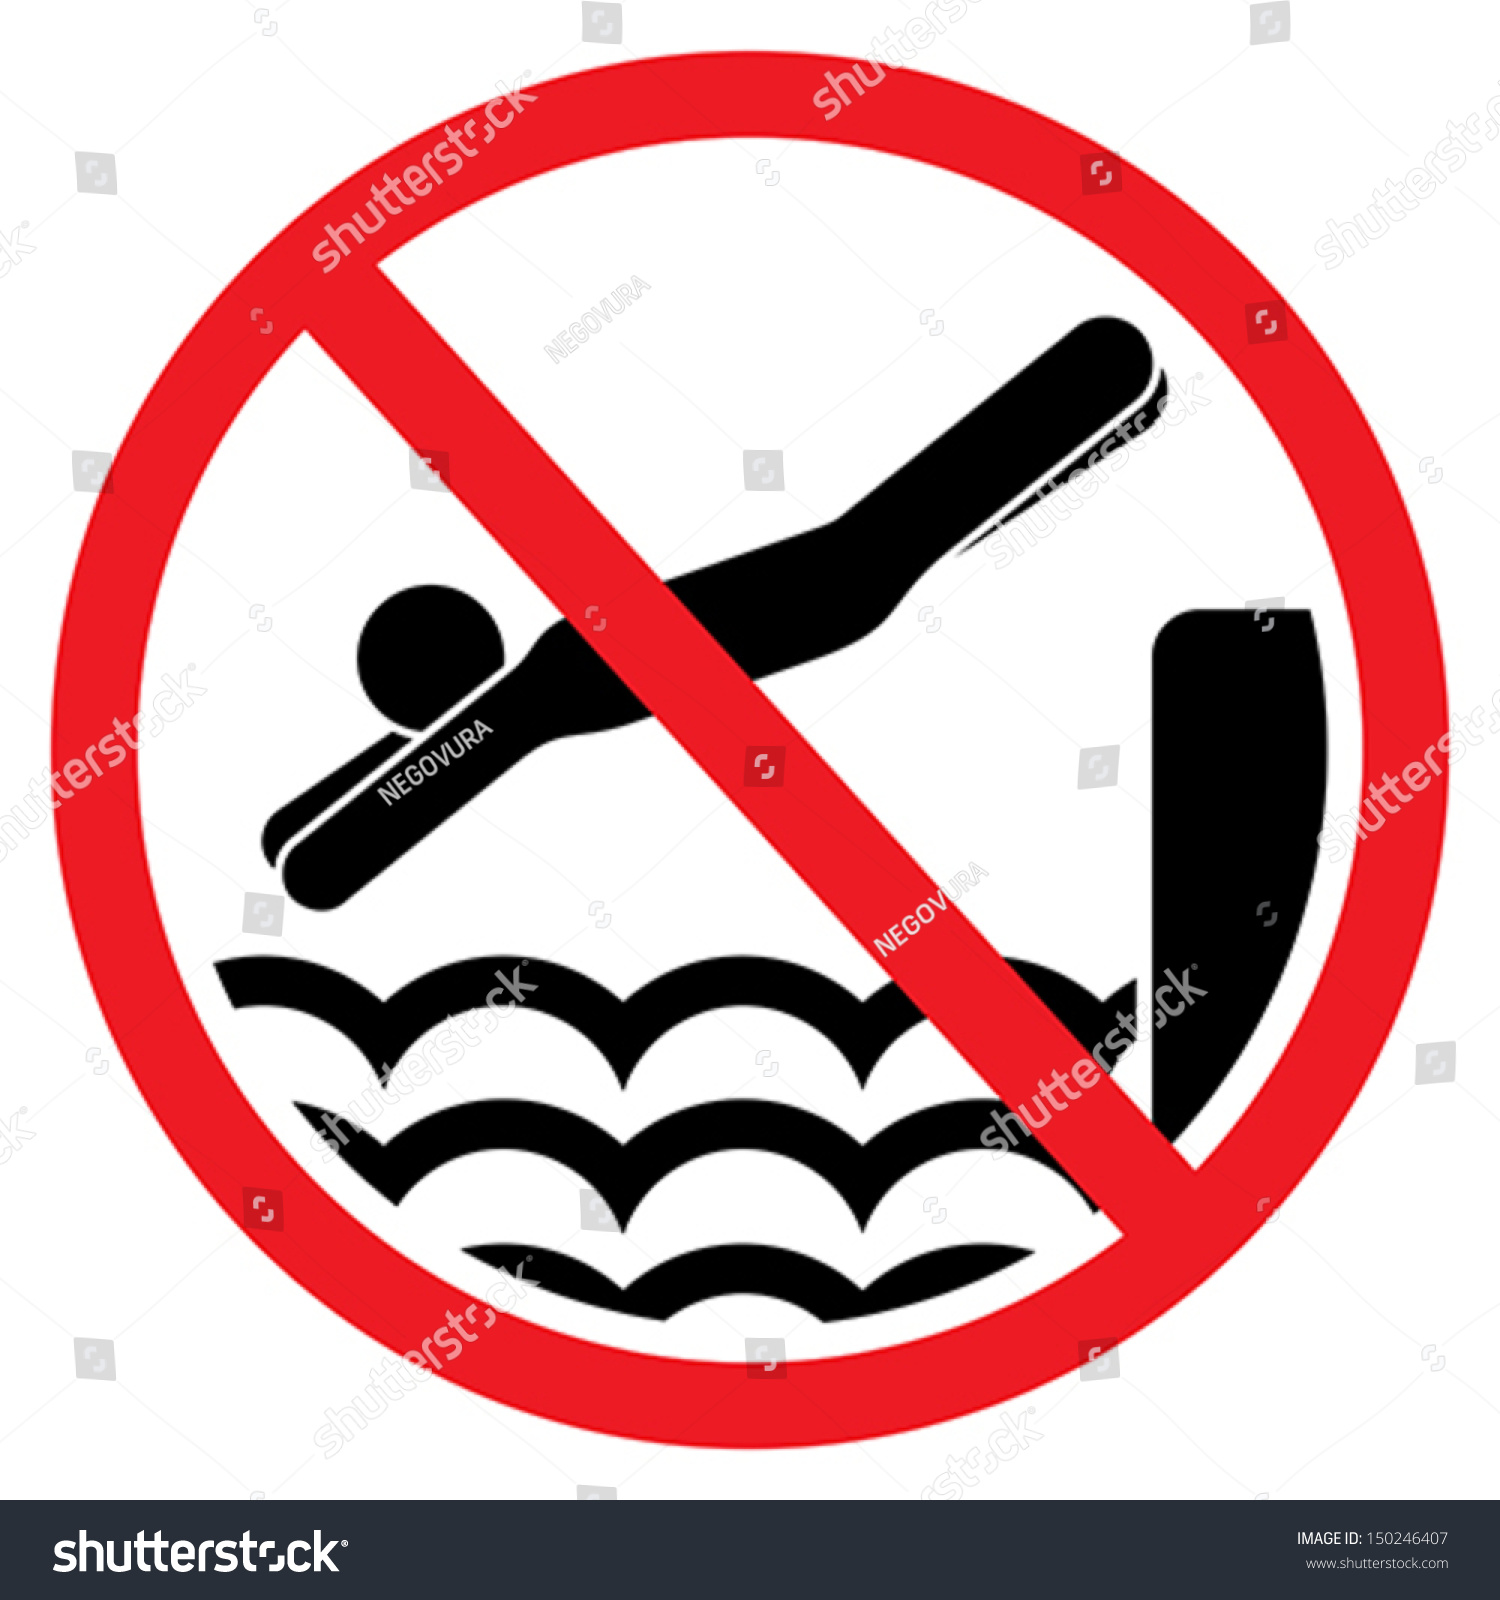 No Diving Jumping Sign Stock Vector 150246407 - Shutterstock